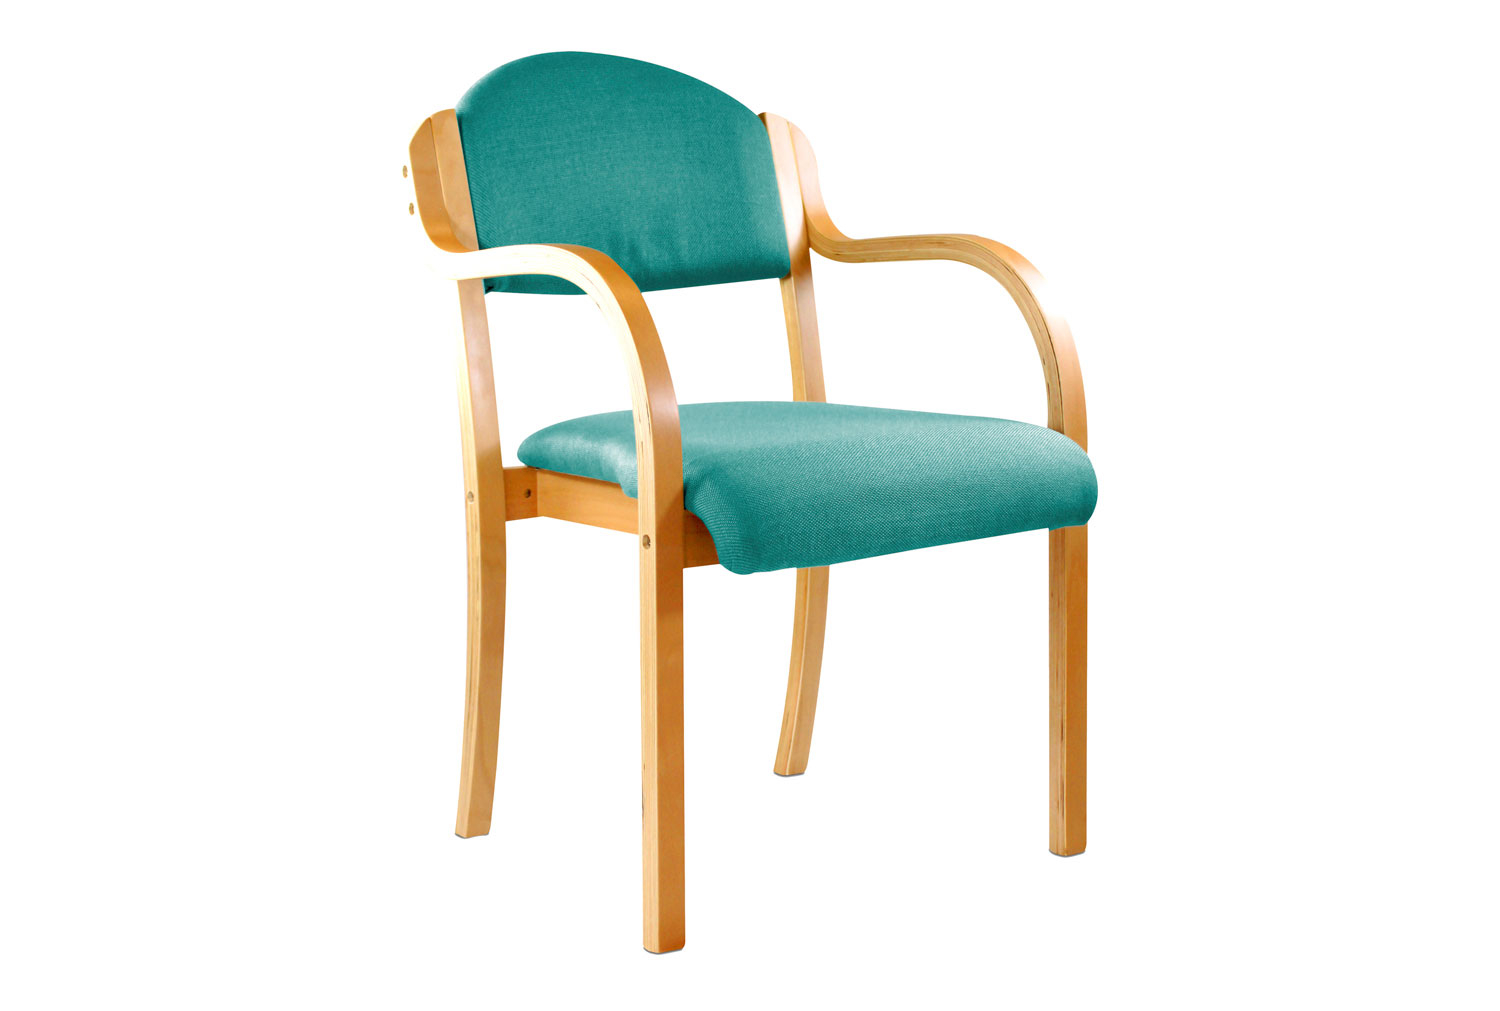 Verve Stacking Armchairs, Green